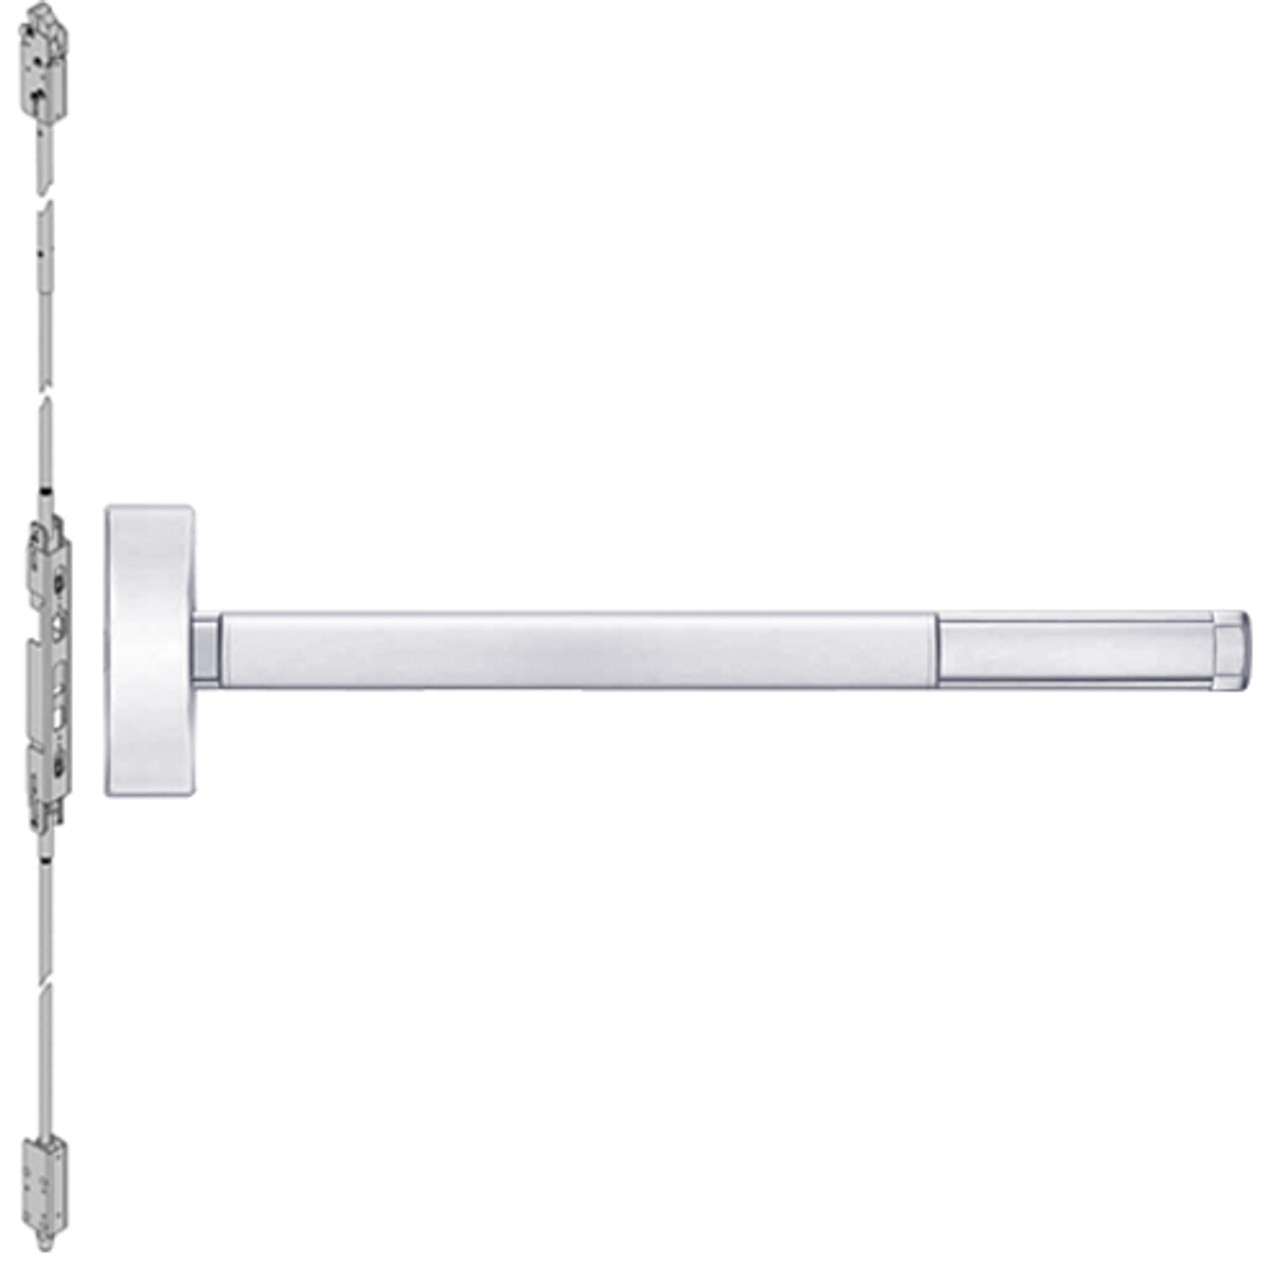 TSFL2801-625-48 PHI 2800 Series Fire Rated Concealed Vertical Rod Exit Device with Touchbar Monitoring Switch Prepped for Cover Plate in Bright Chrome Finish